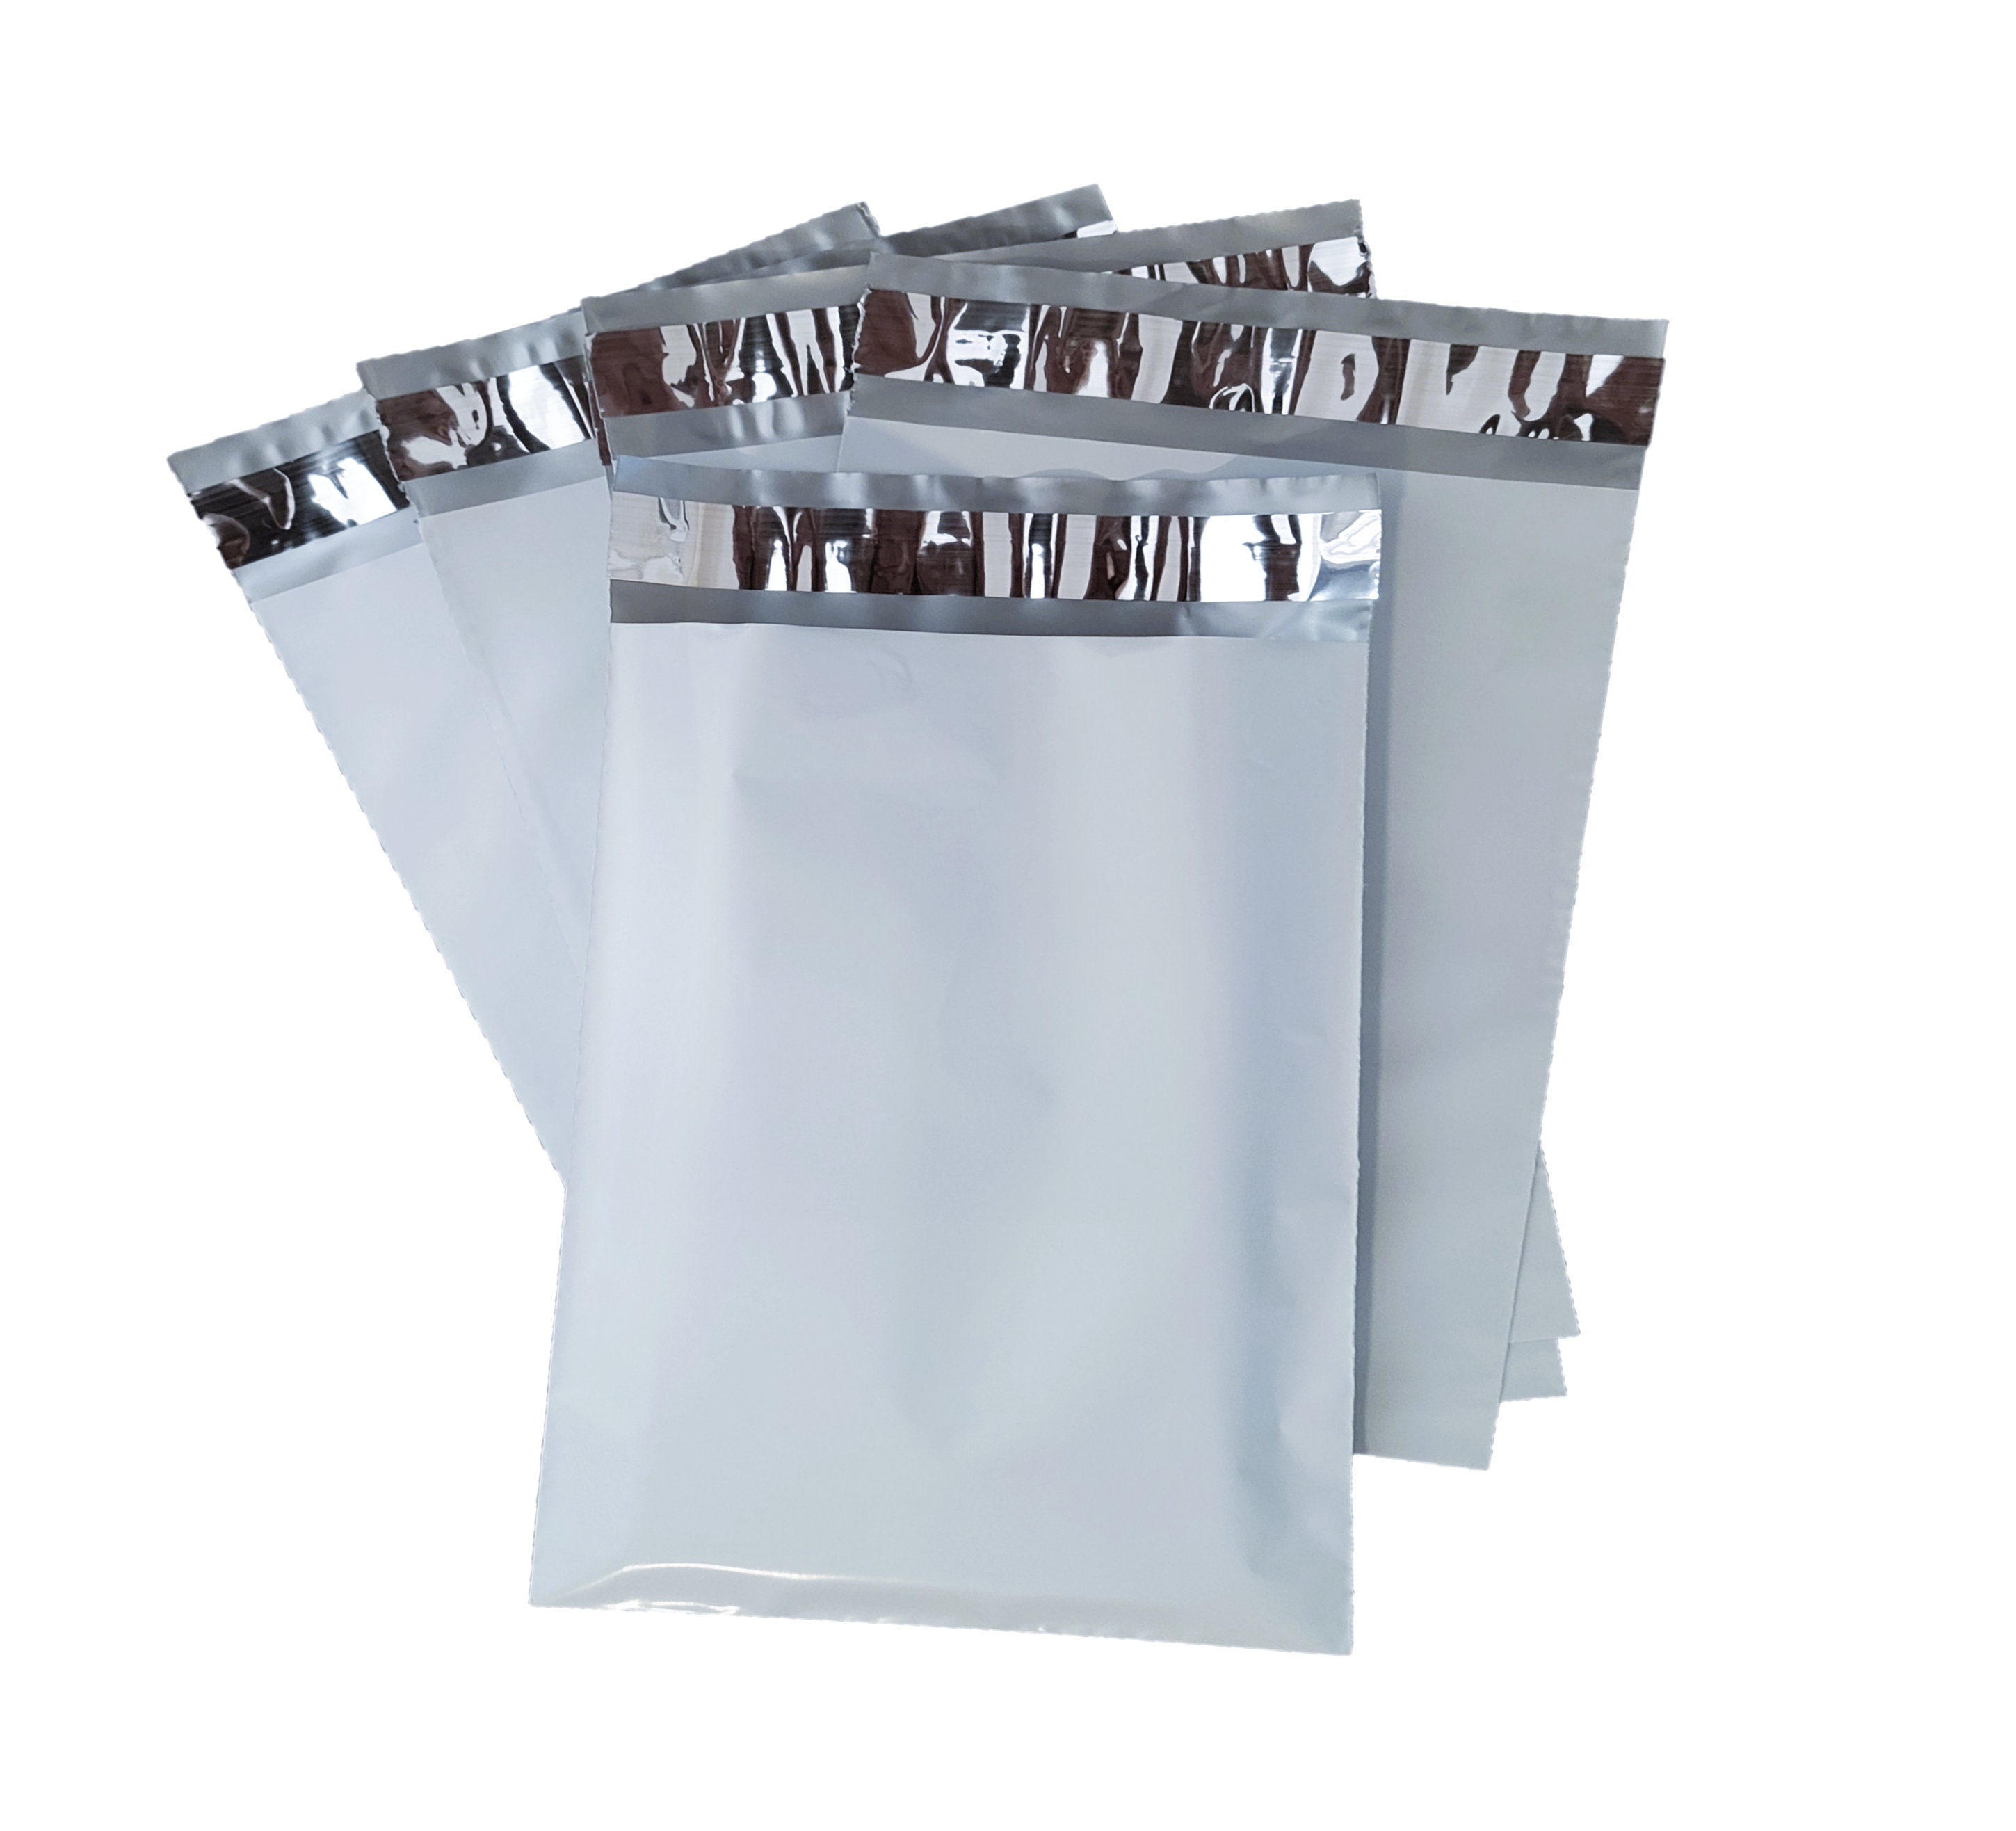 6 Pack Clear Gift Bags with Handles 7 x 8 x 4 inch Transparent Gift Bag Heavy Duty Gift Wrap Bags Large Reusable Plastic Bags for Bridal Party Baby